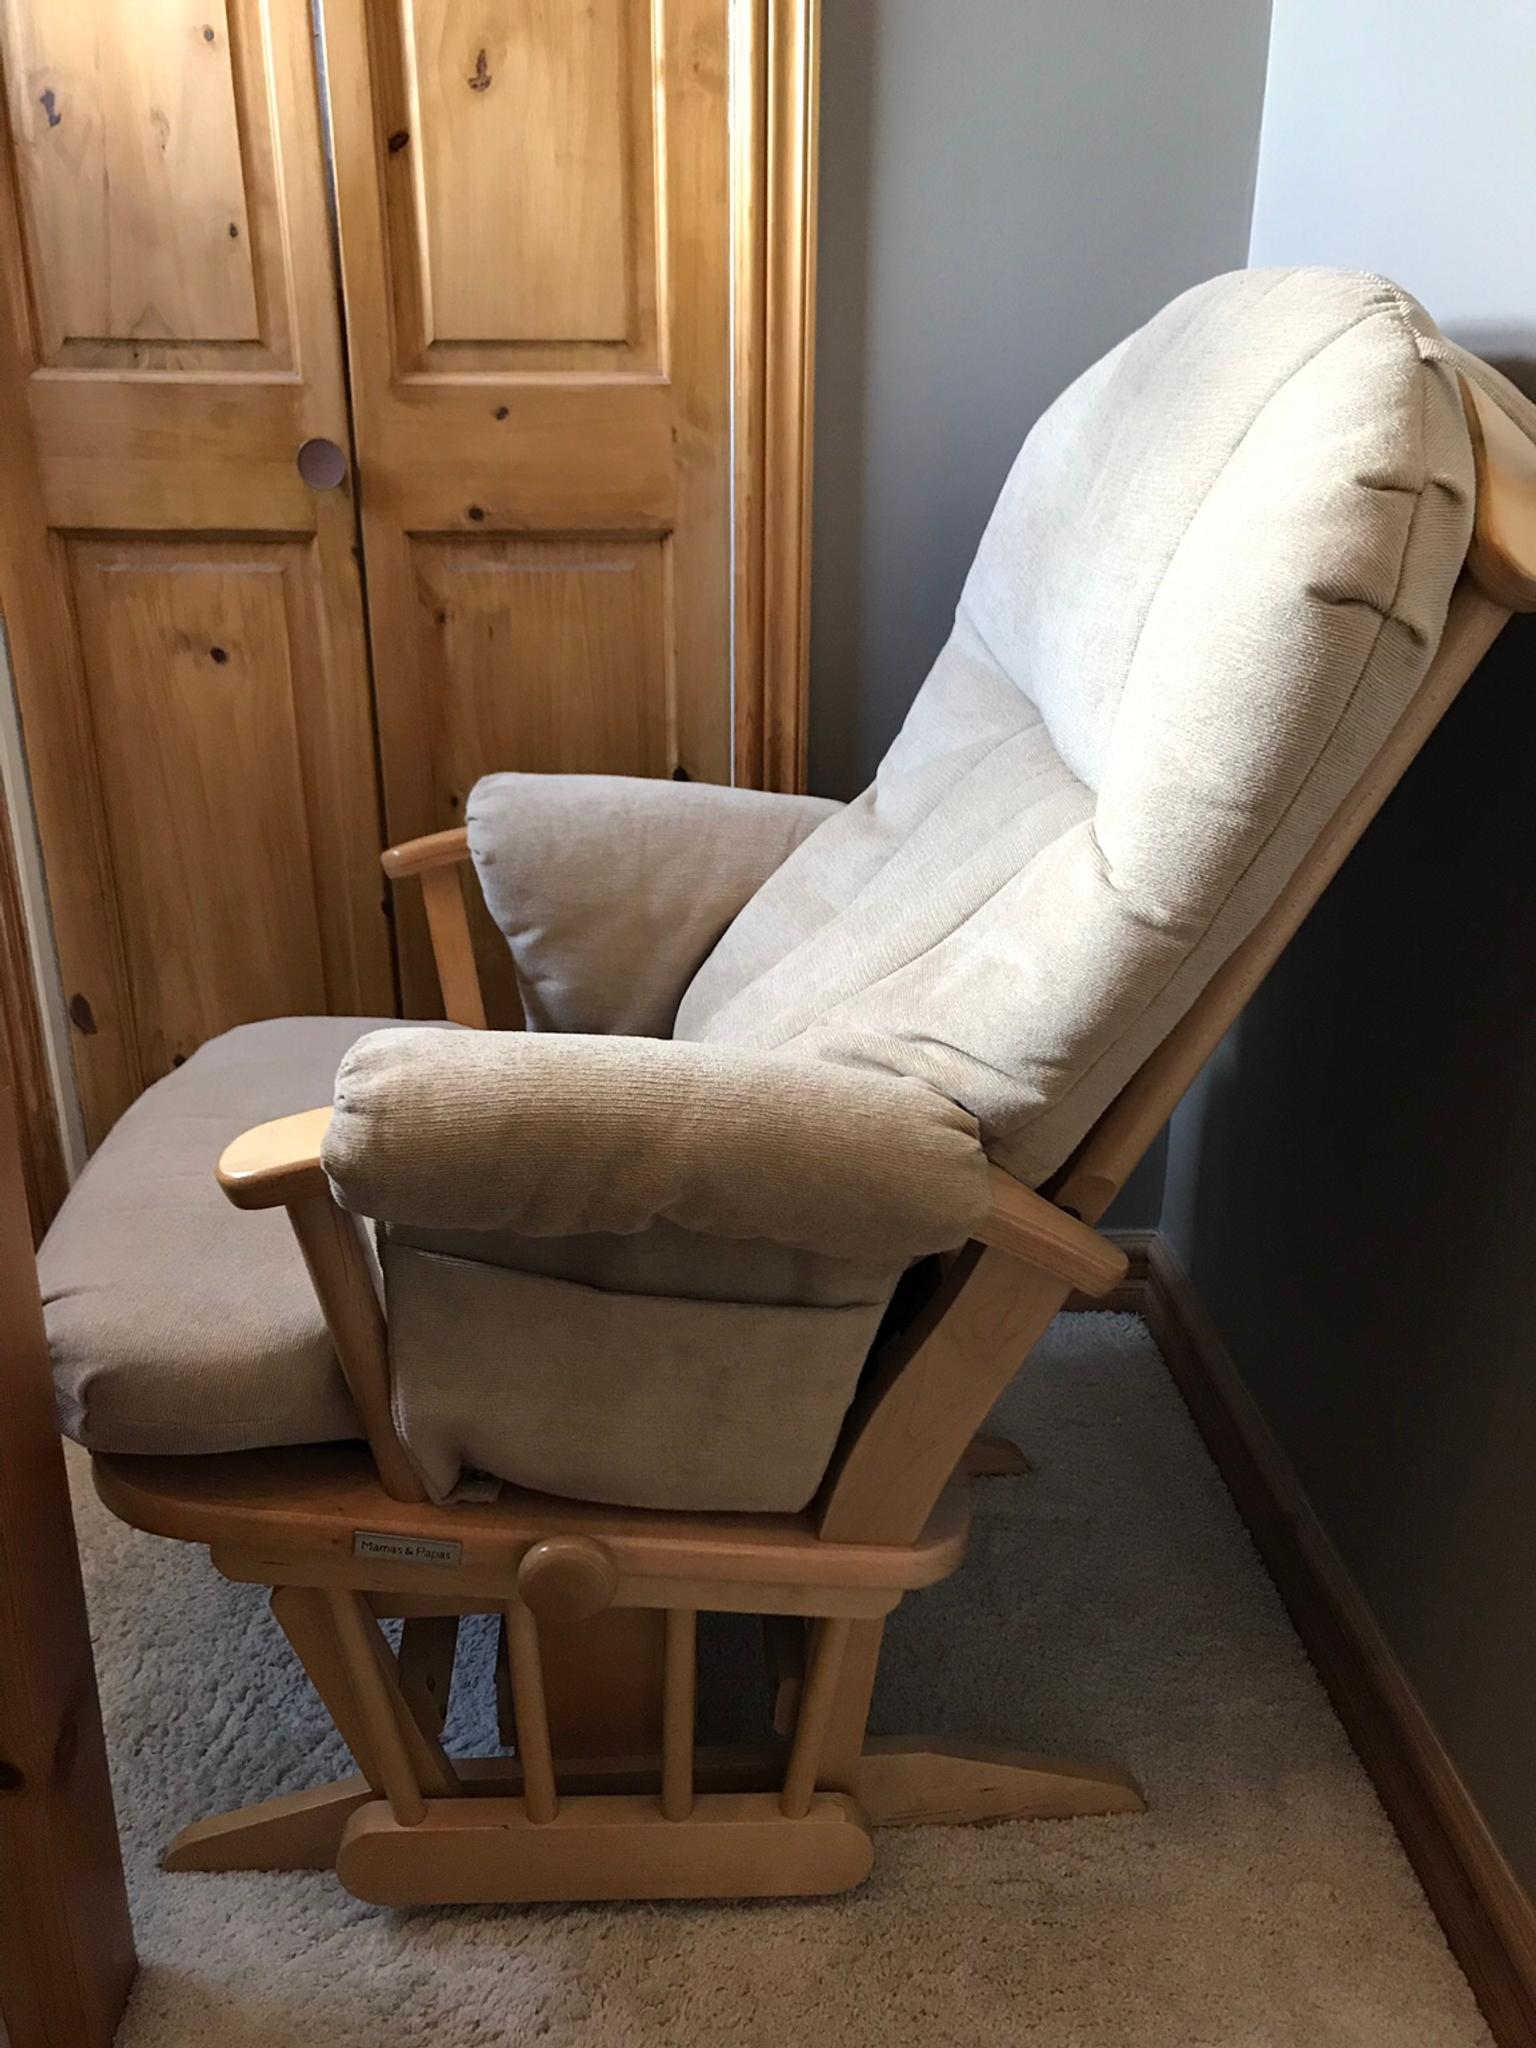 Mamas Papas Rocking Chair In S40 North East Derbyshire For